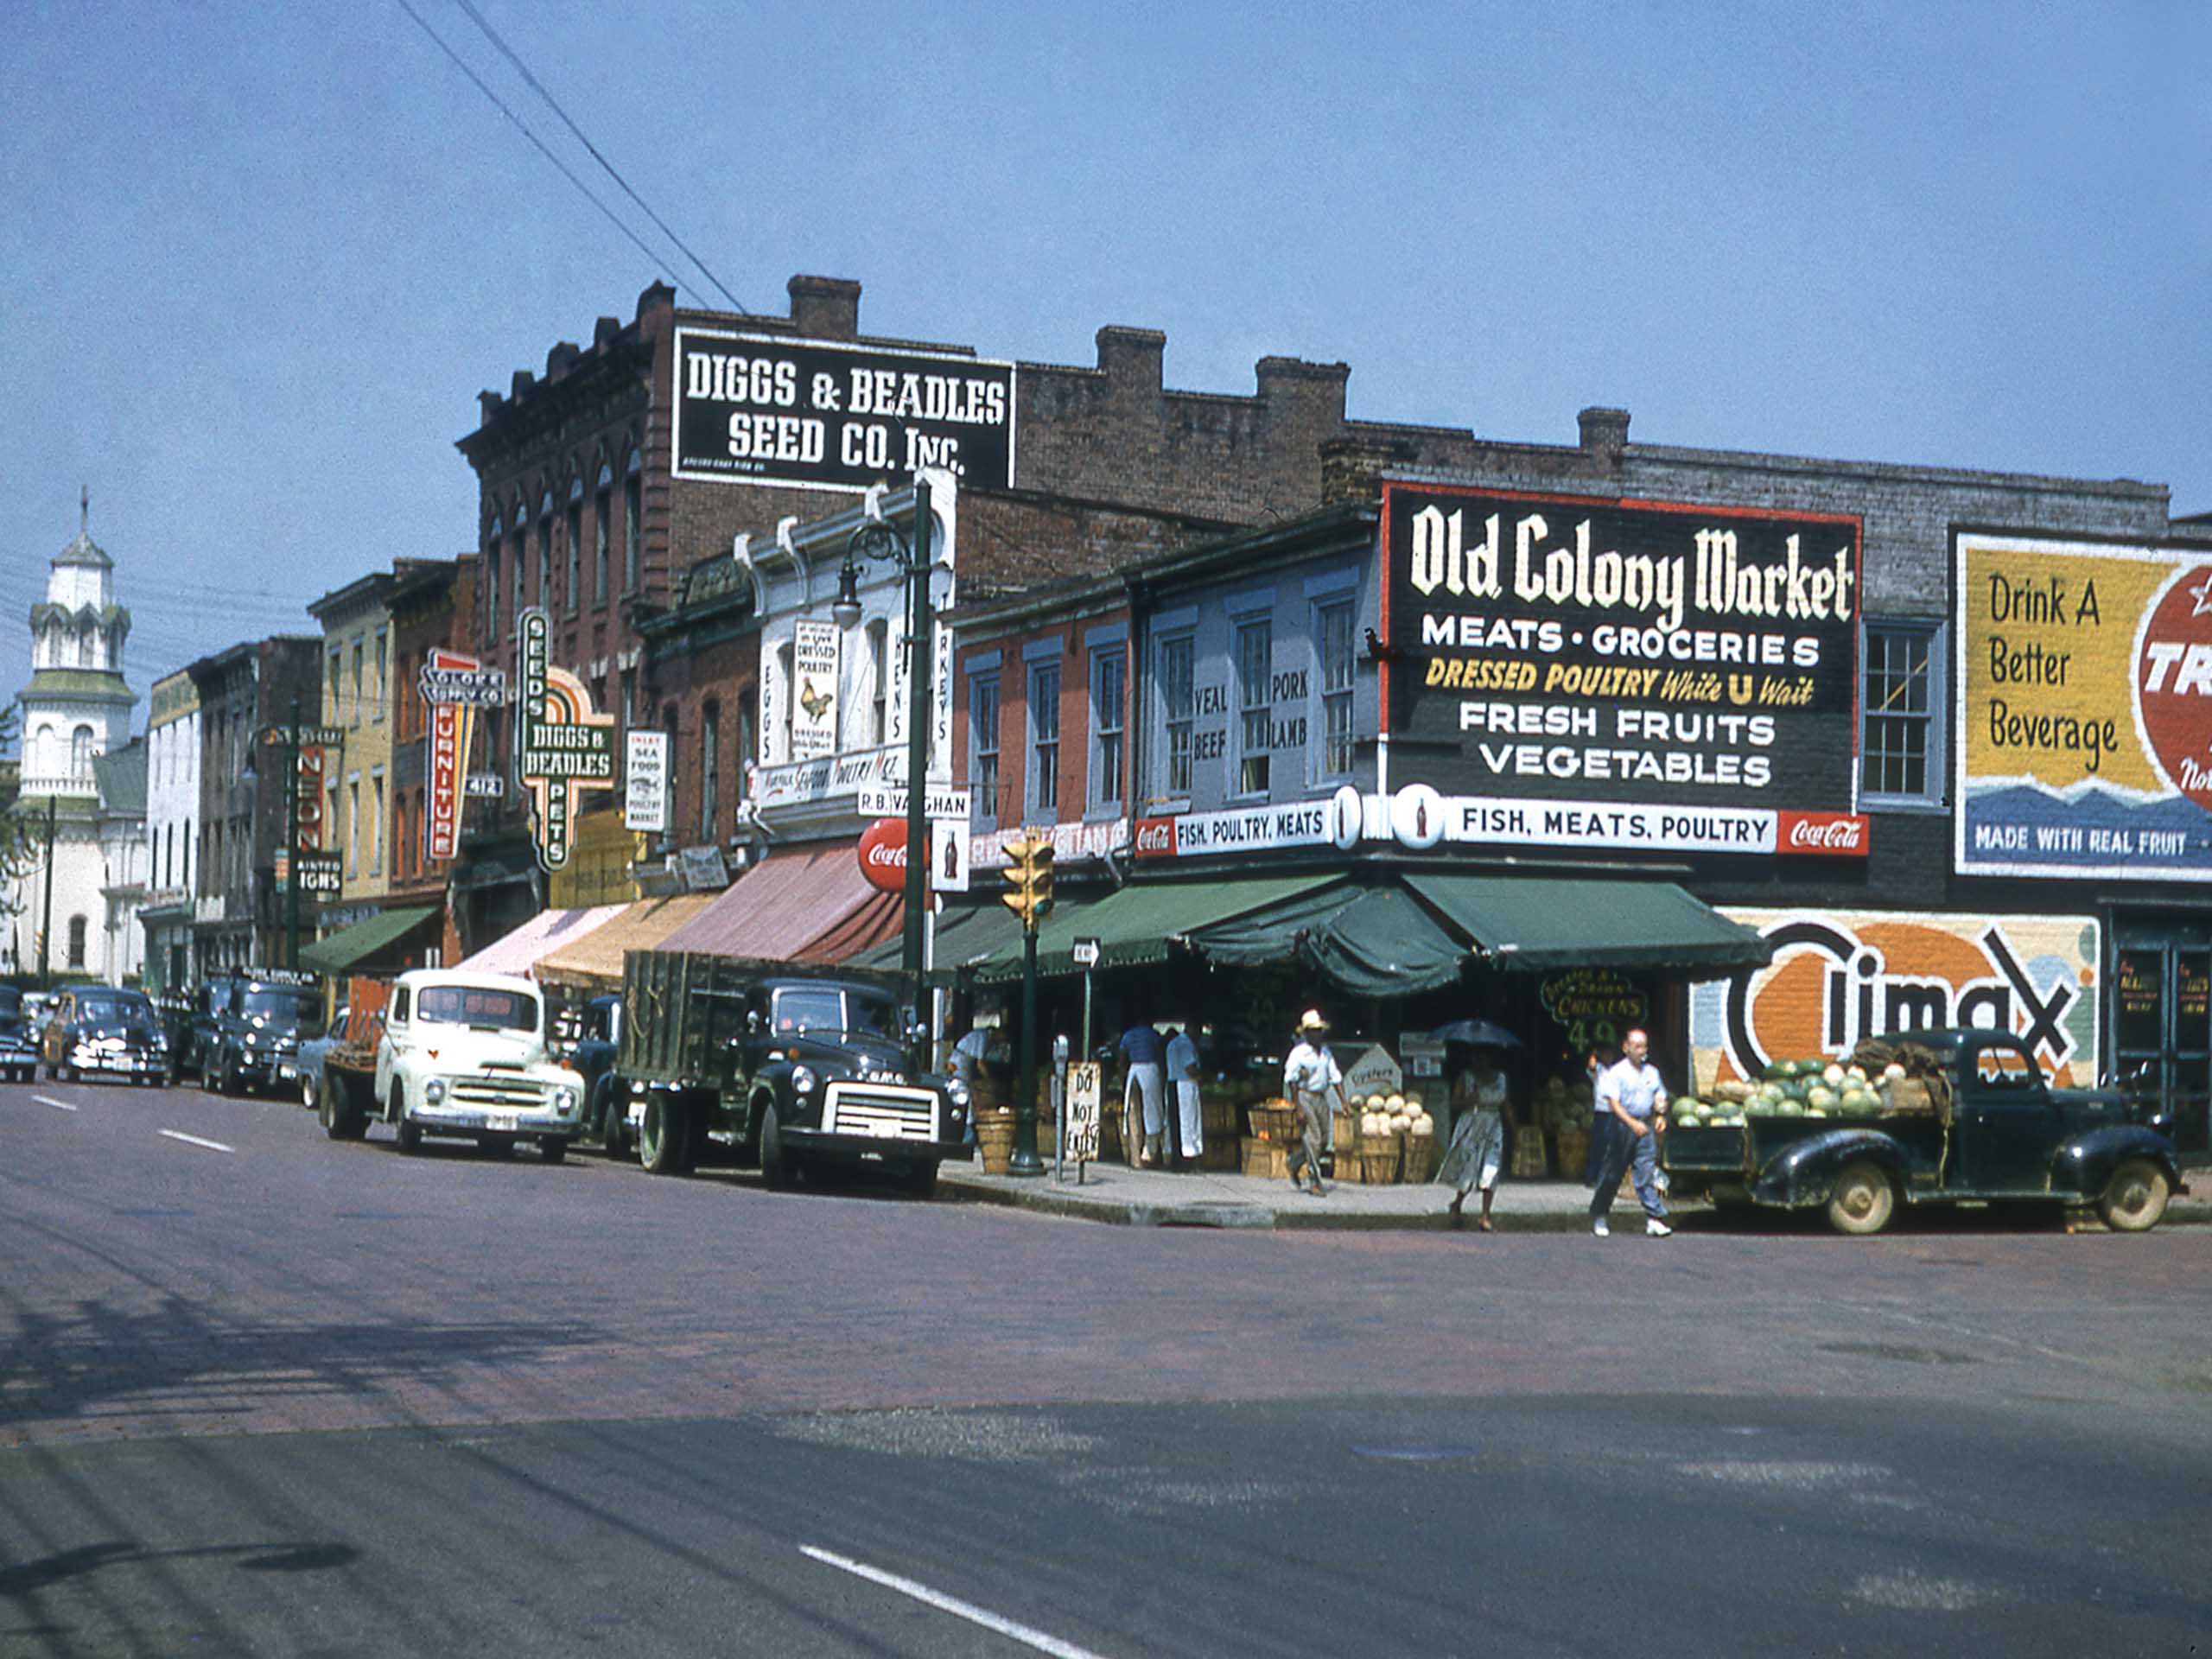 A view of a grocery market on the 400 block of East Marshall Street in Jackson Ward, circa 1955